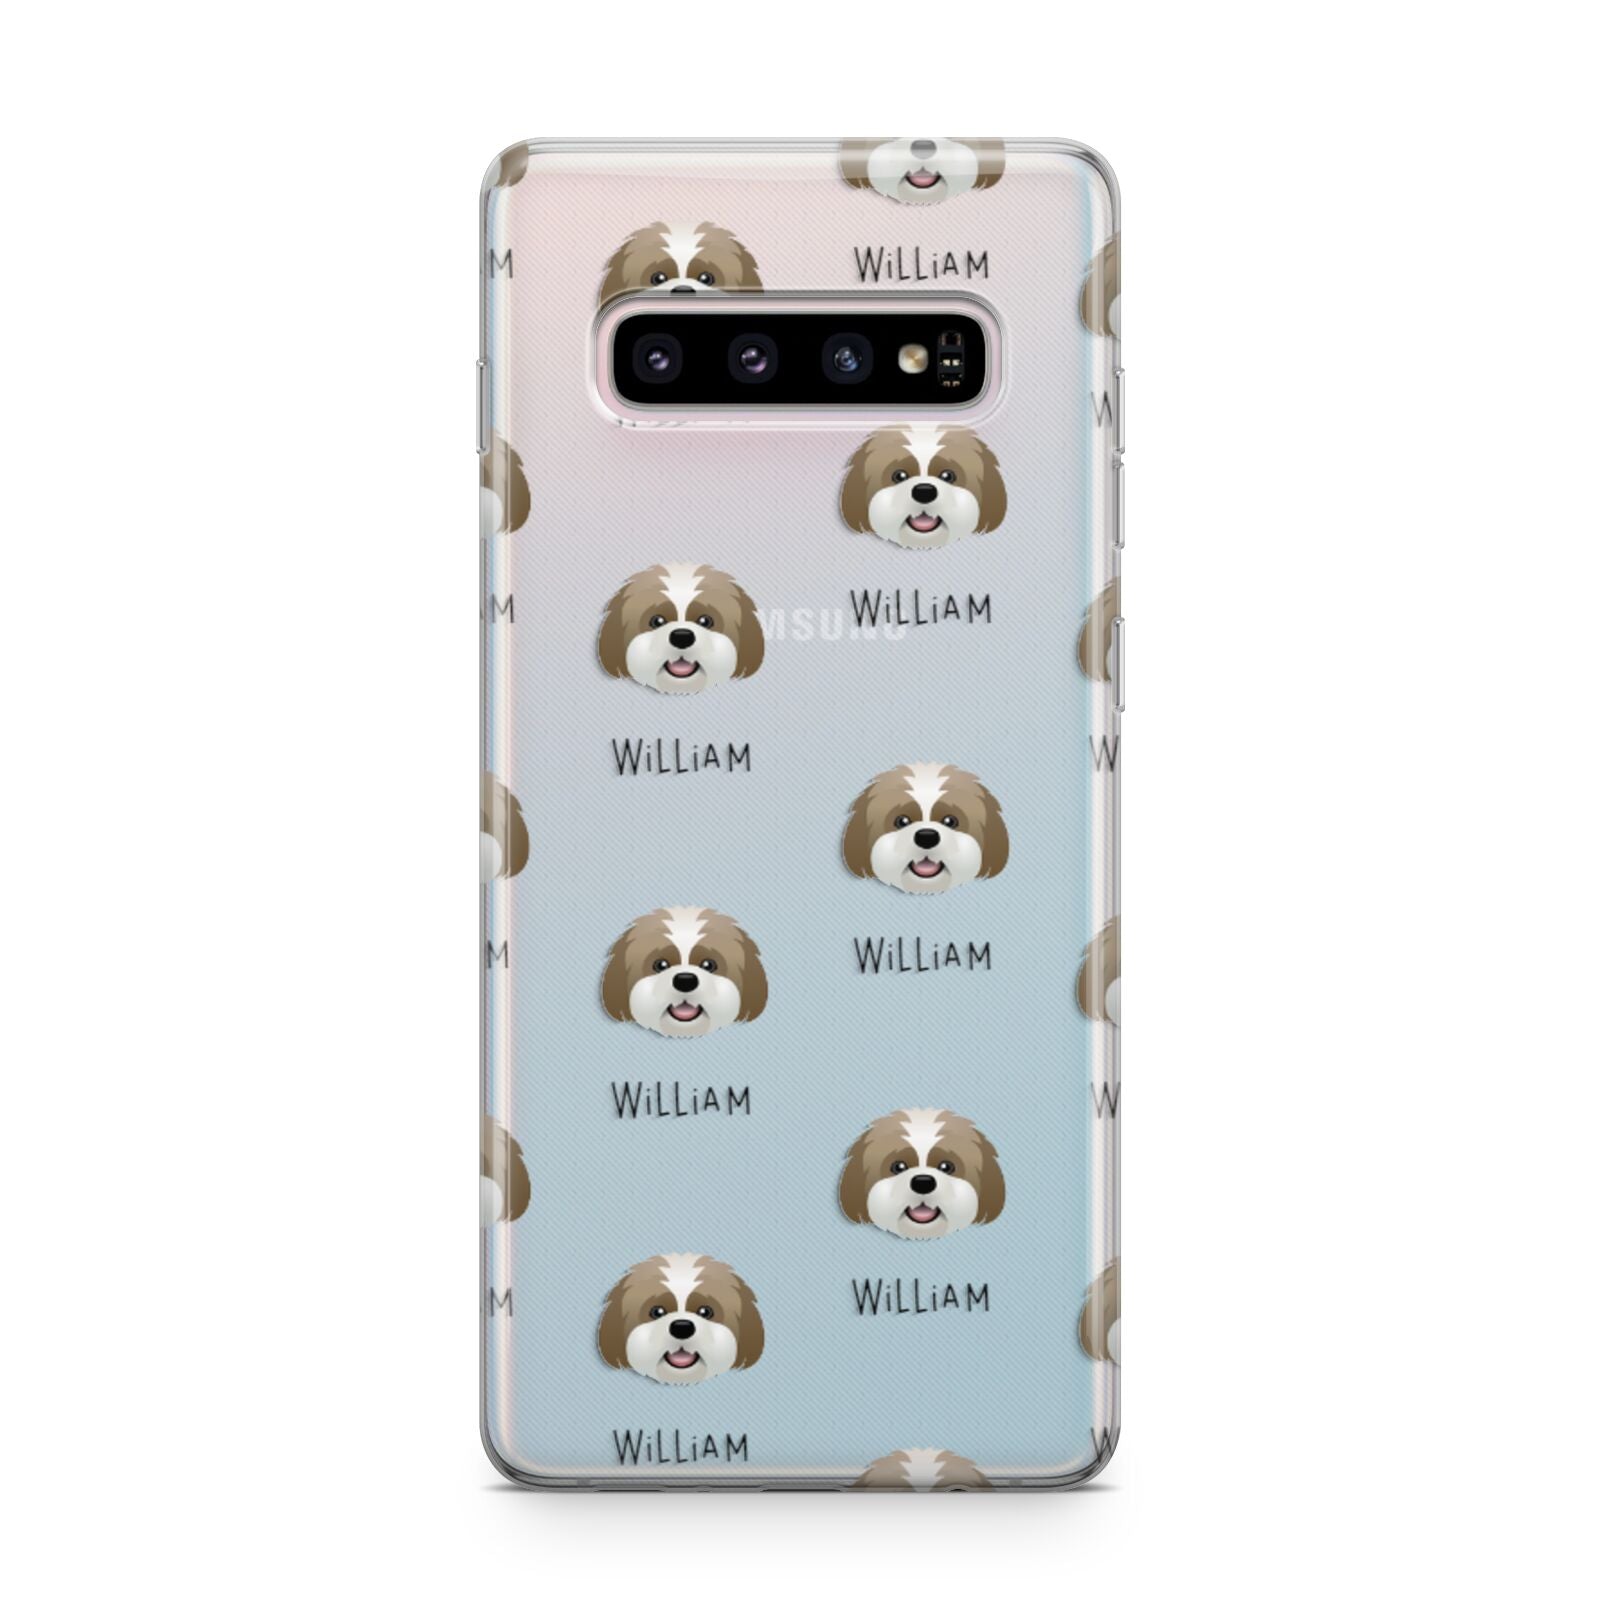 Lhatese Icon with Name Samsung Galaxy S10 Plus Case